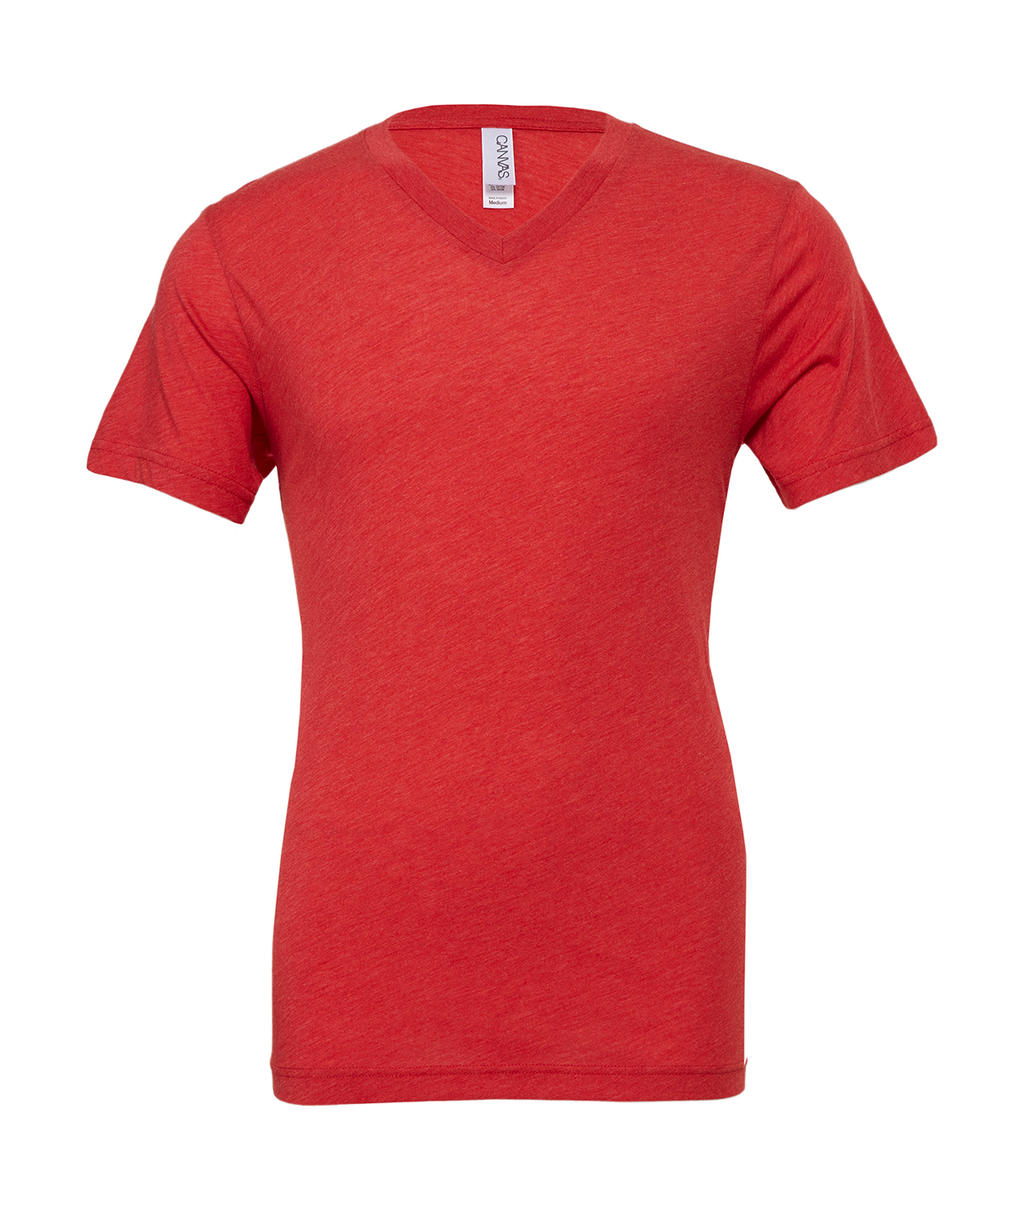  Unisex Triblend V-Neck T-Shirt in Farbe Red Triblend